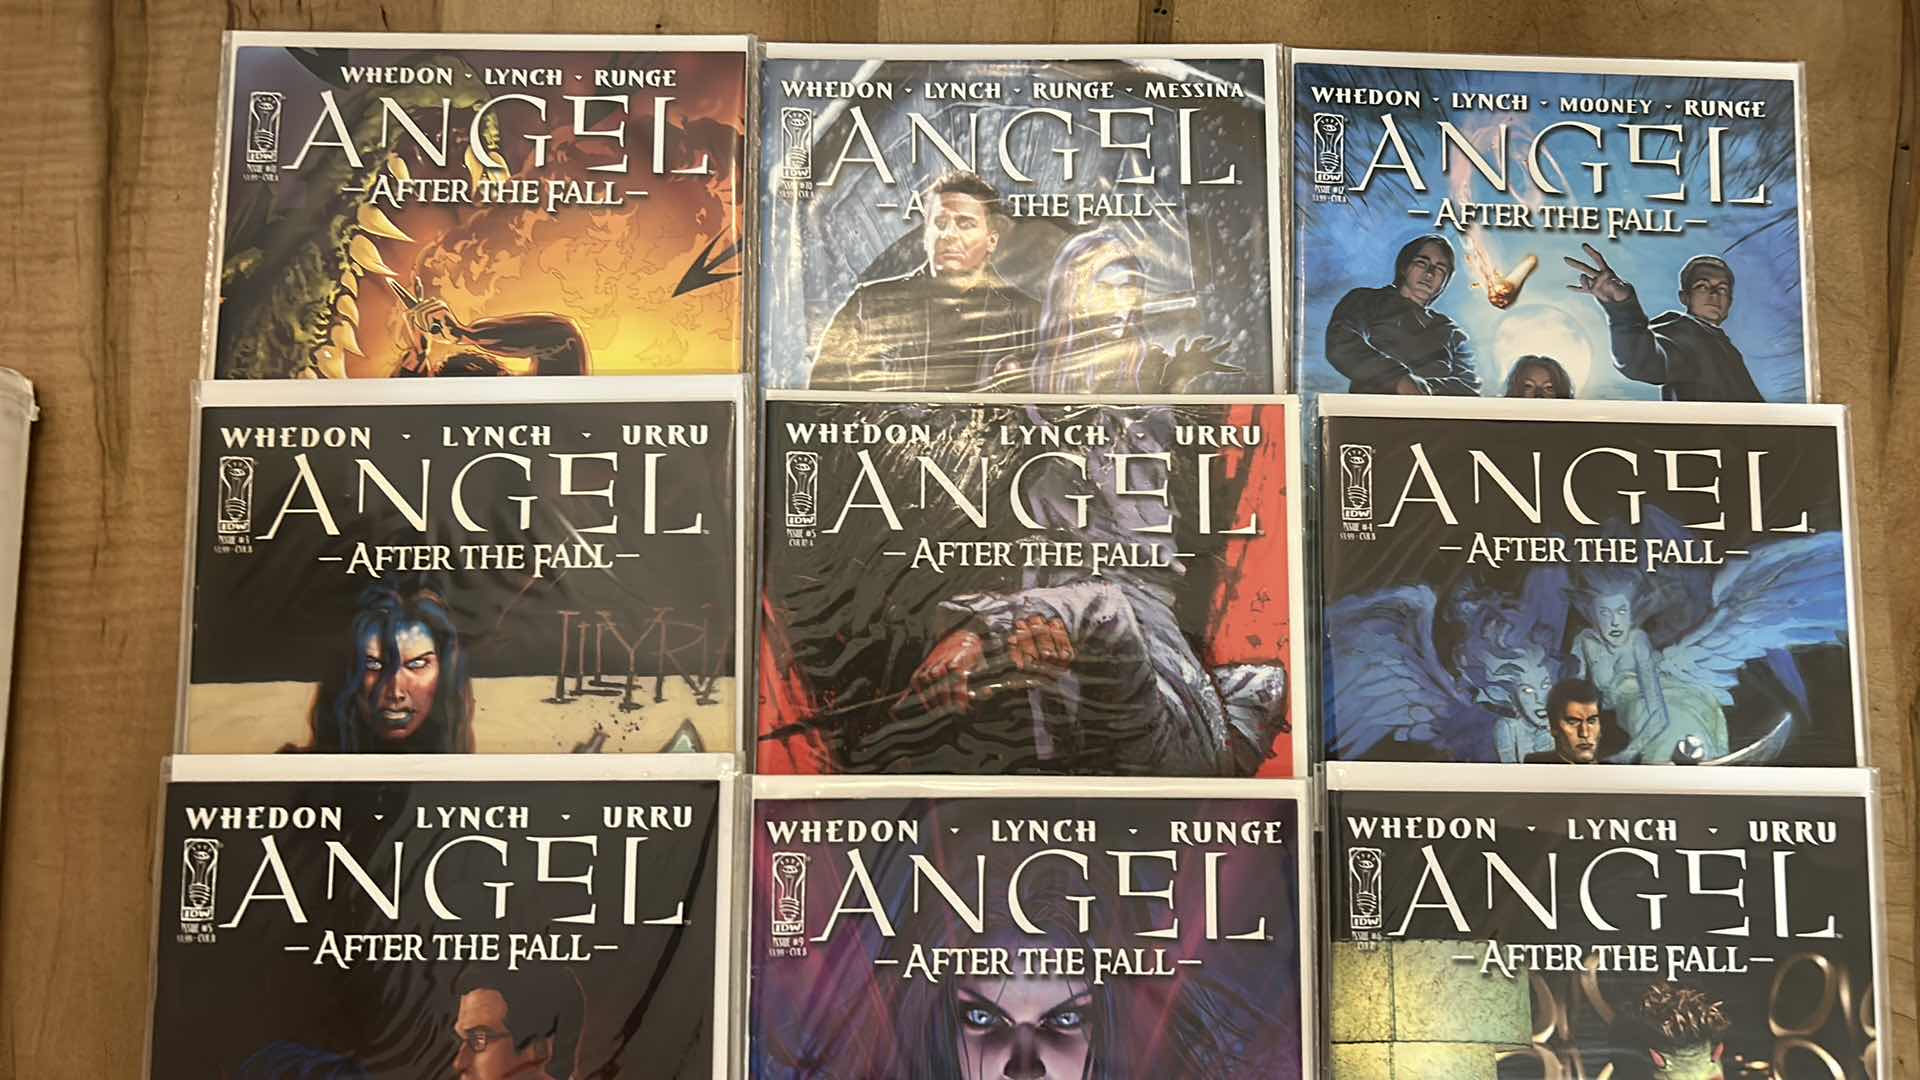 Photo 2 of 9 - ANGEL AFTER THE FALL COMIC BOOKS